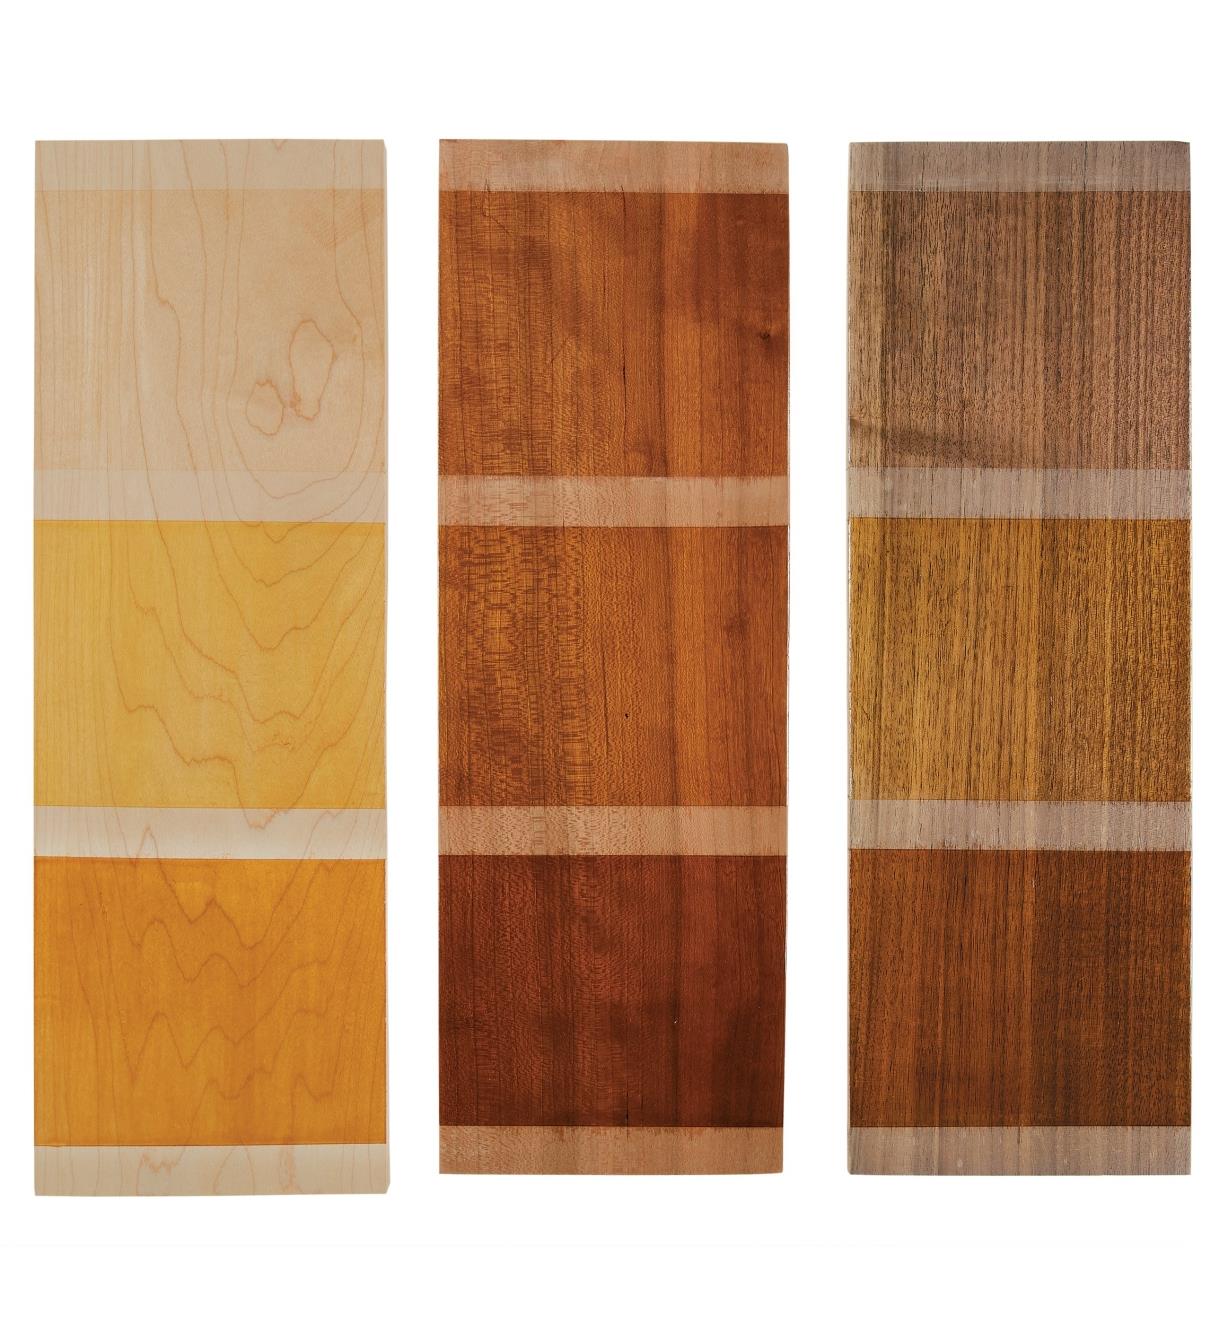 Three wooden boards with samples of shellac colors